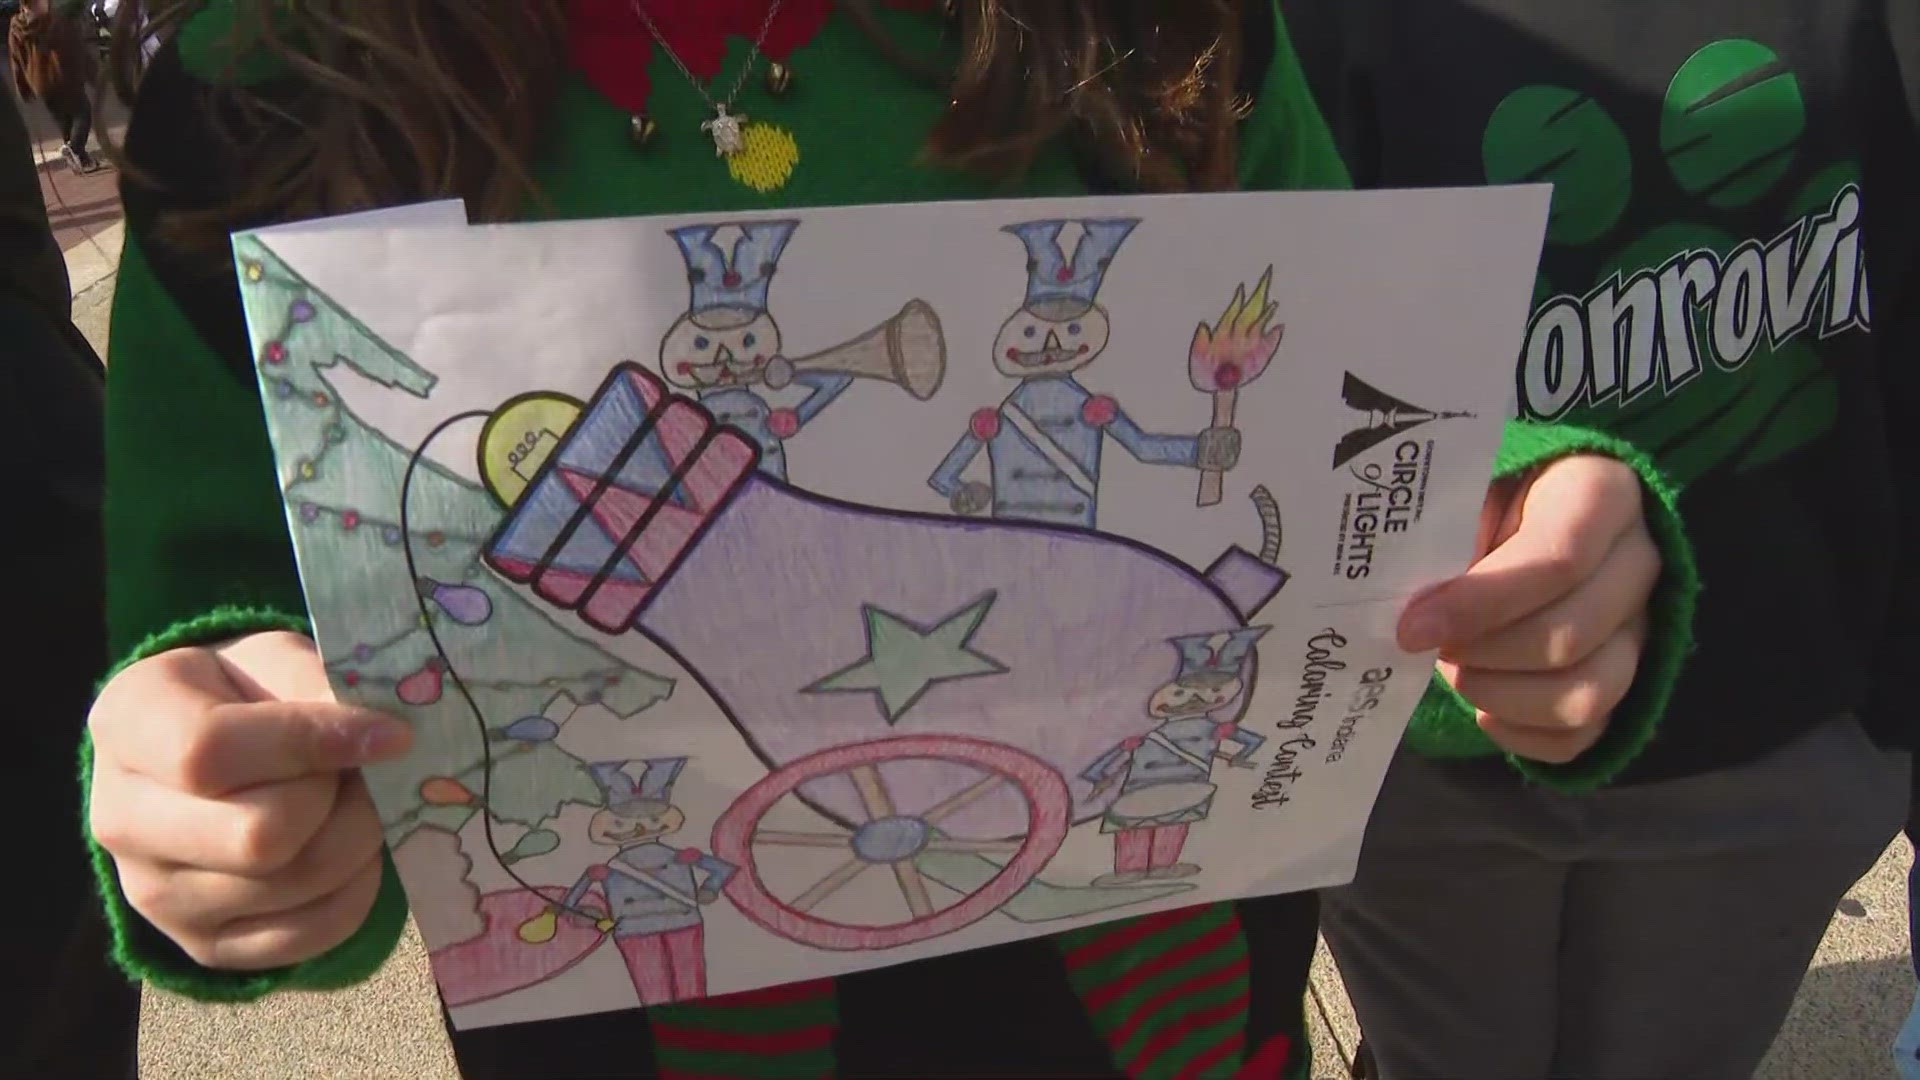 The winner of this year's coloring contest is 11-year-old Jenna Williamson, a 5th grader at Monrovia Elementary